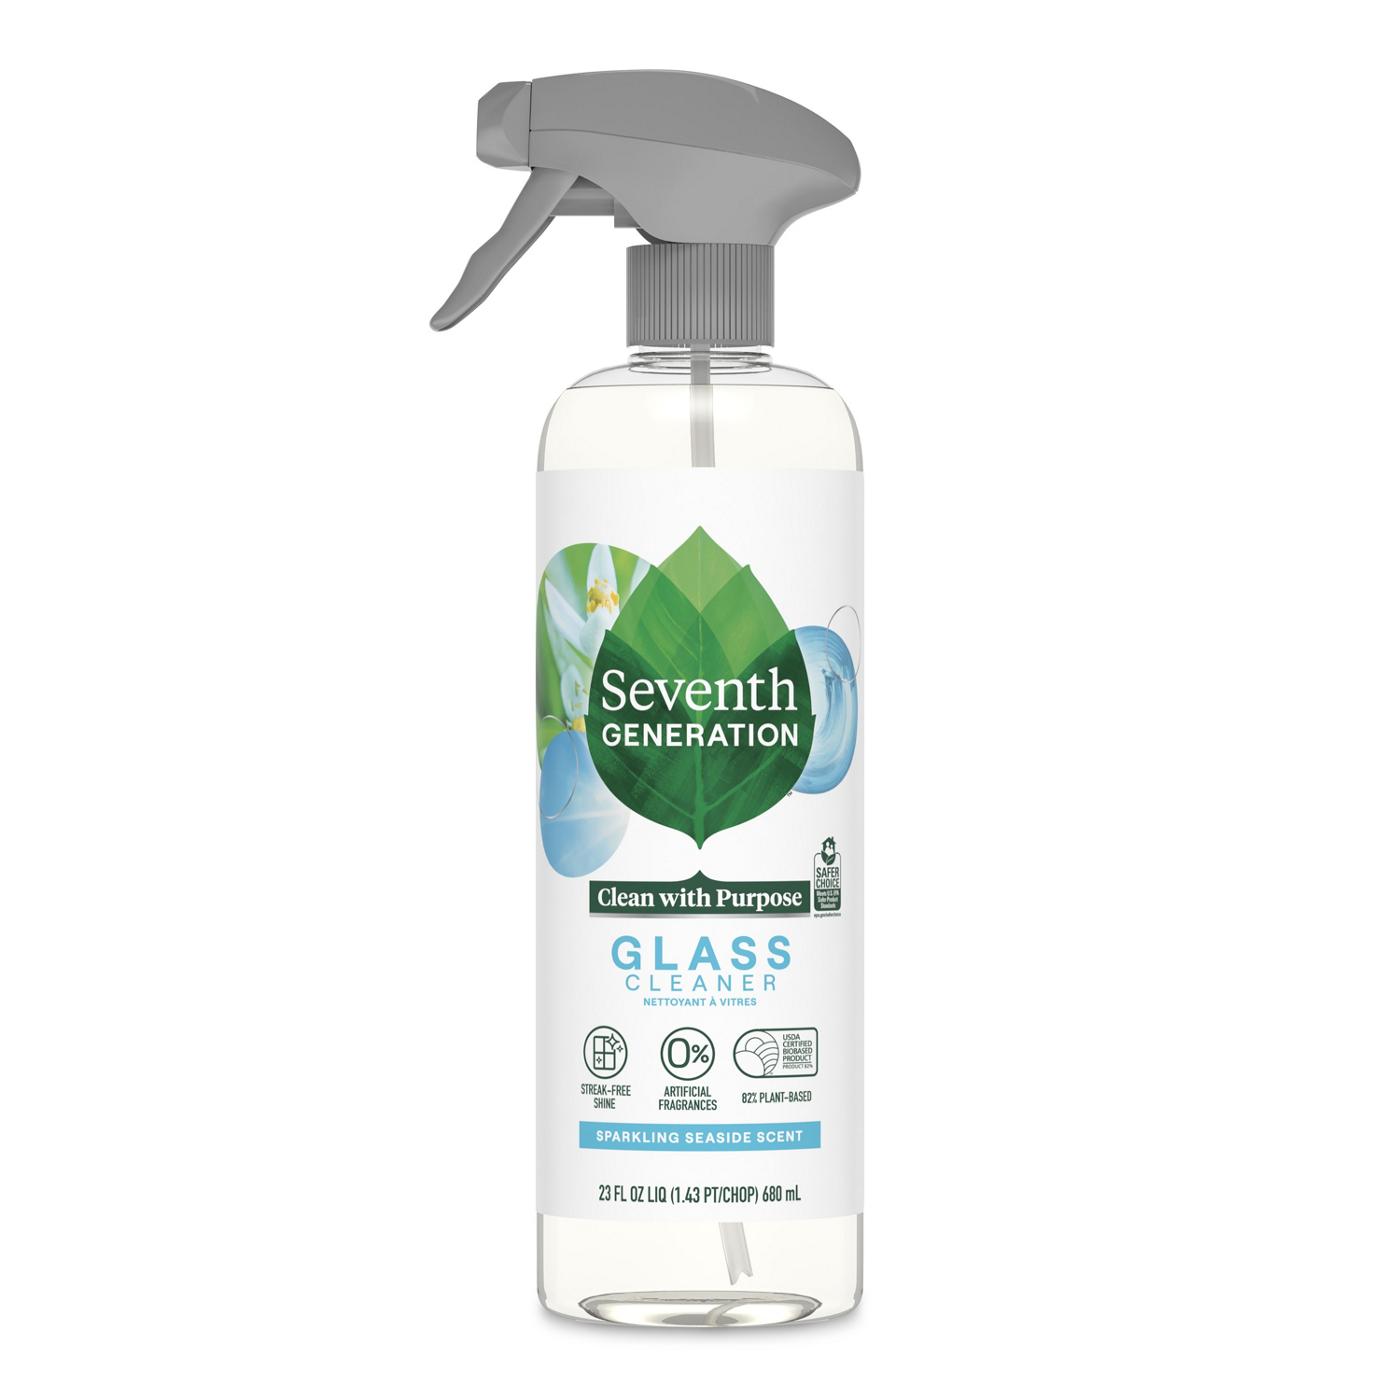 Seventh Generation Sparkling Seaside Glass Cleaner Spray; image 1 of 8